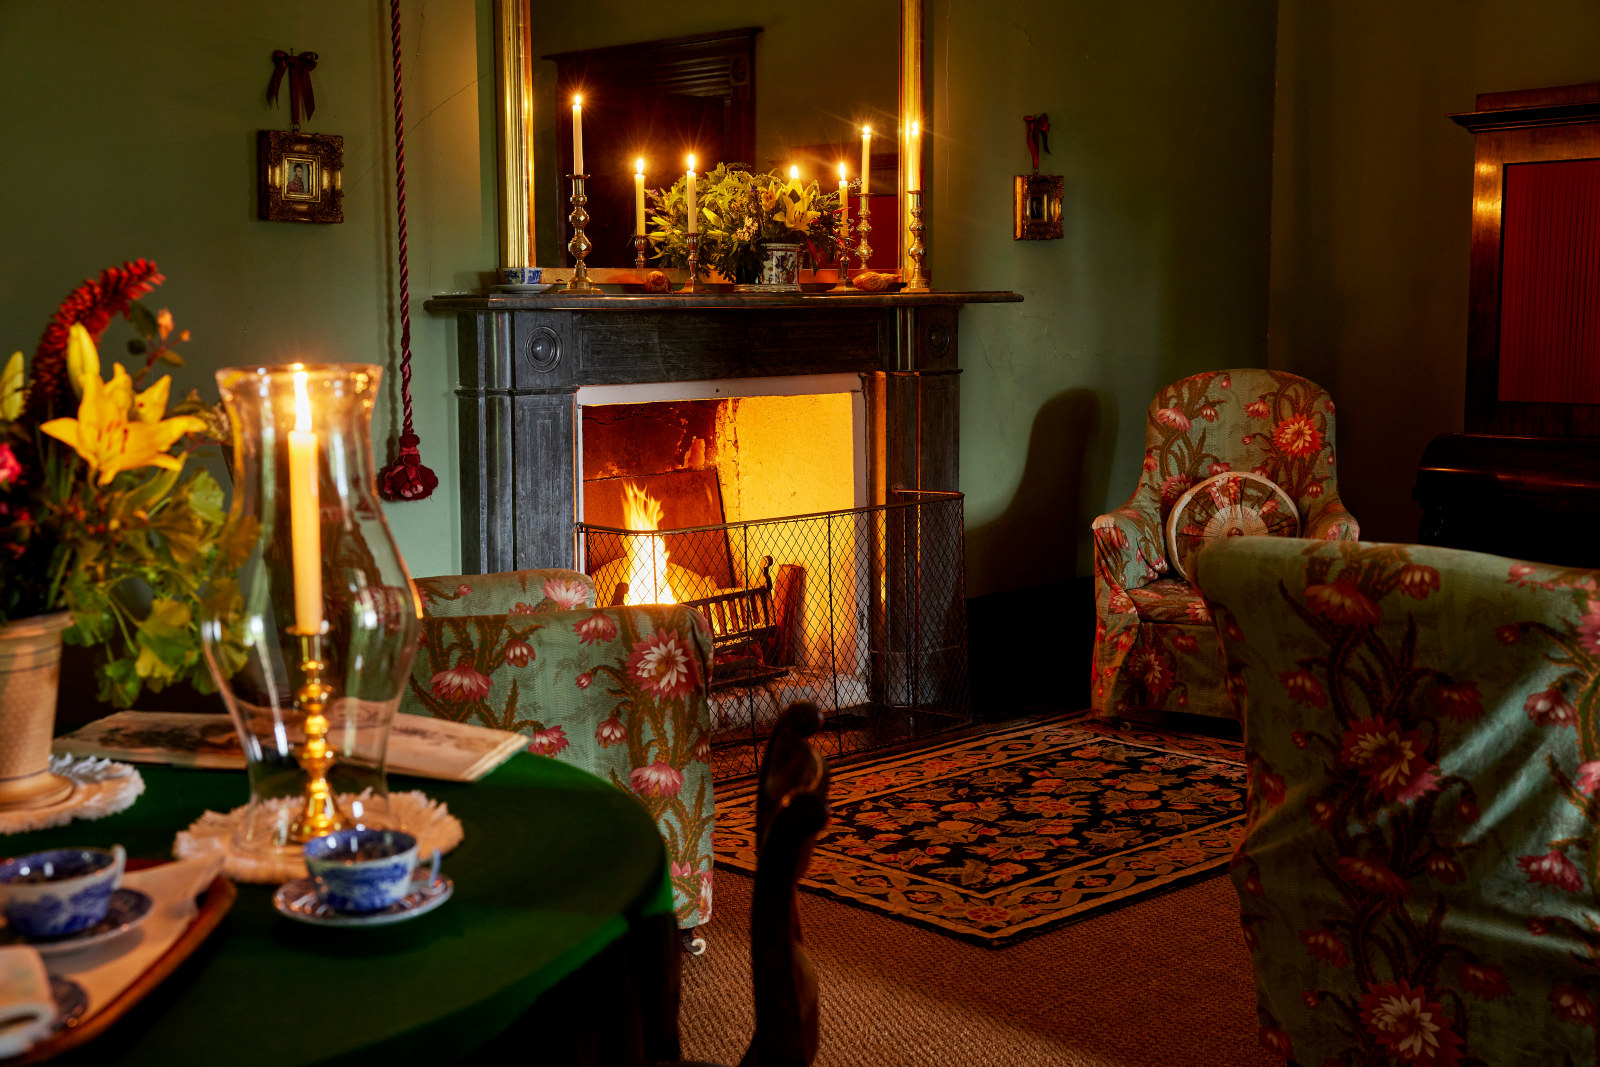 The drawing room at Elizabeth Farm lit by candles